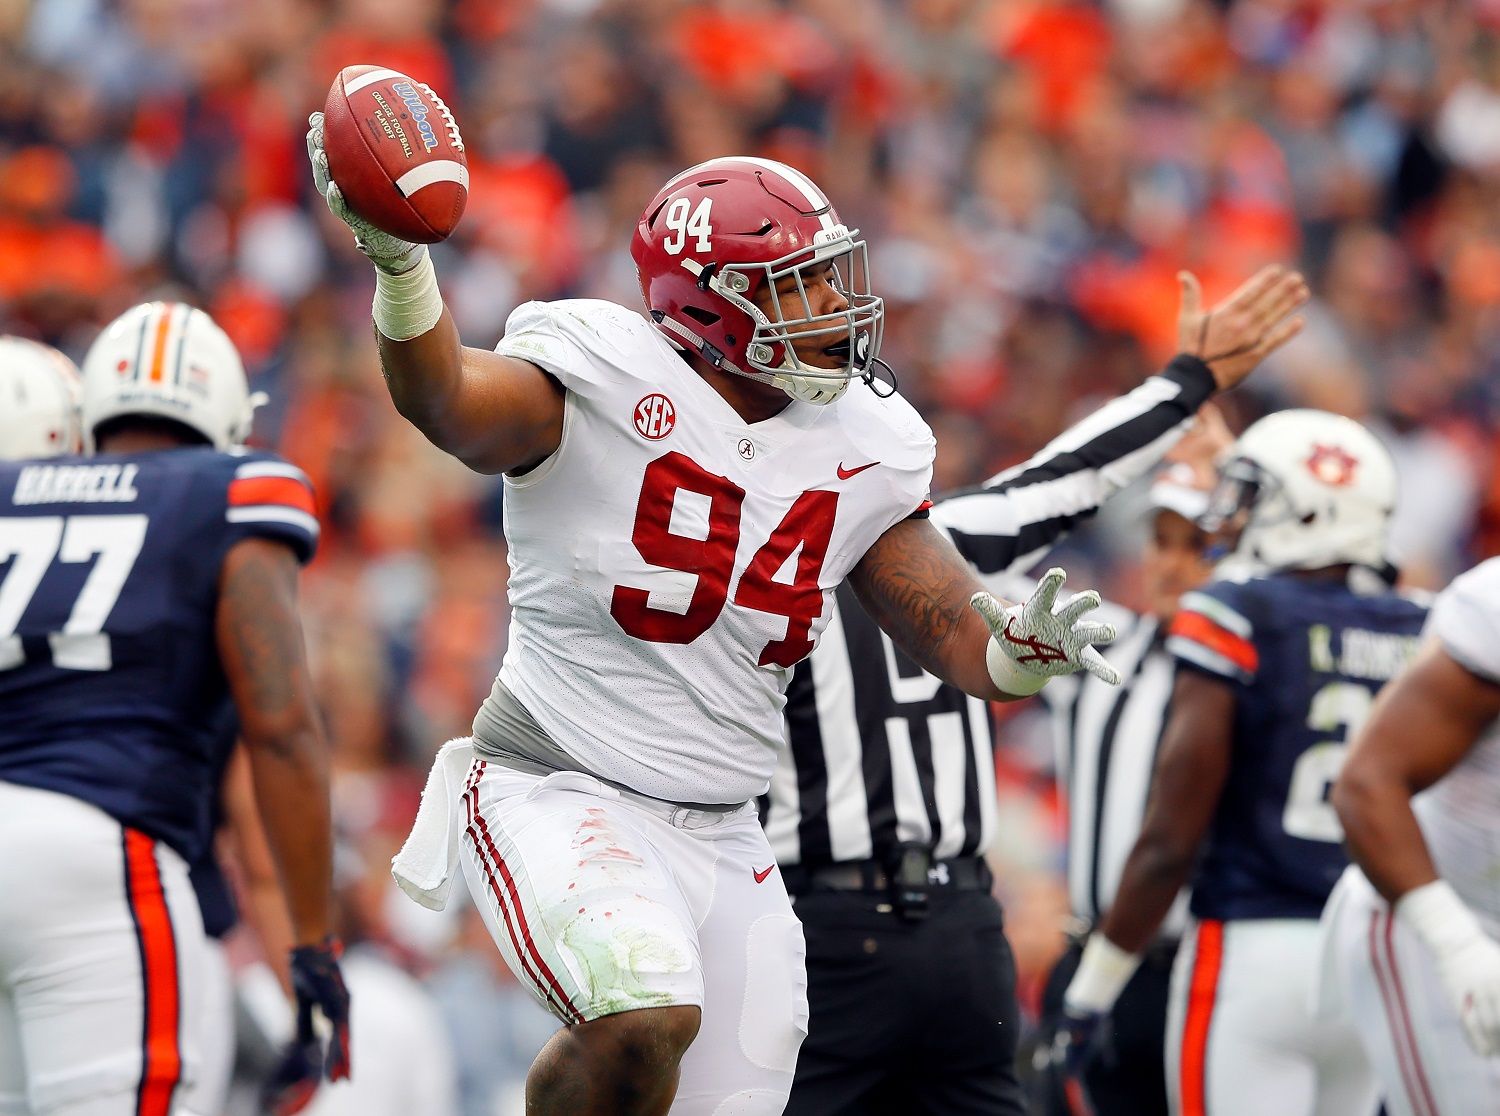 AUBURN, AL - NOVEMBER 25:  Da'Ron Payne #94 of the Alabama Crimson Tide reacts after recovering a fumble during the first quarter against the Auburn Tigers at Jordan Hare Stadium on November 25, 2017 in Auburn, Alabama.  (Photo by Kevin C. Cox/Getty Images)